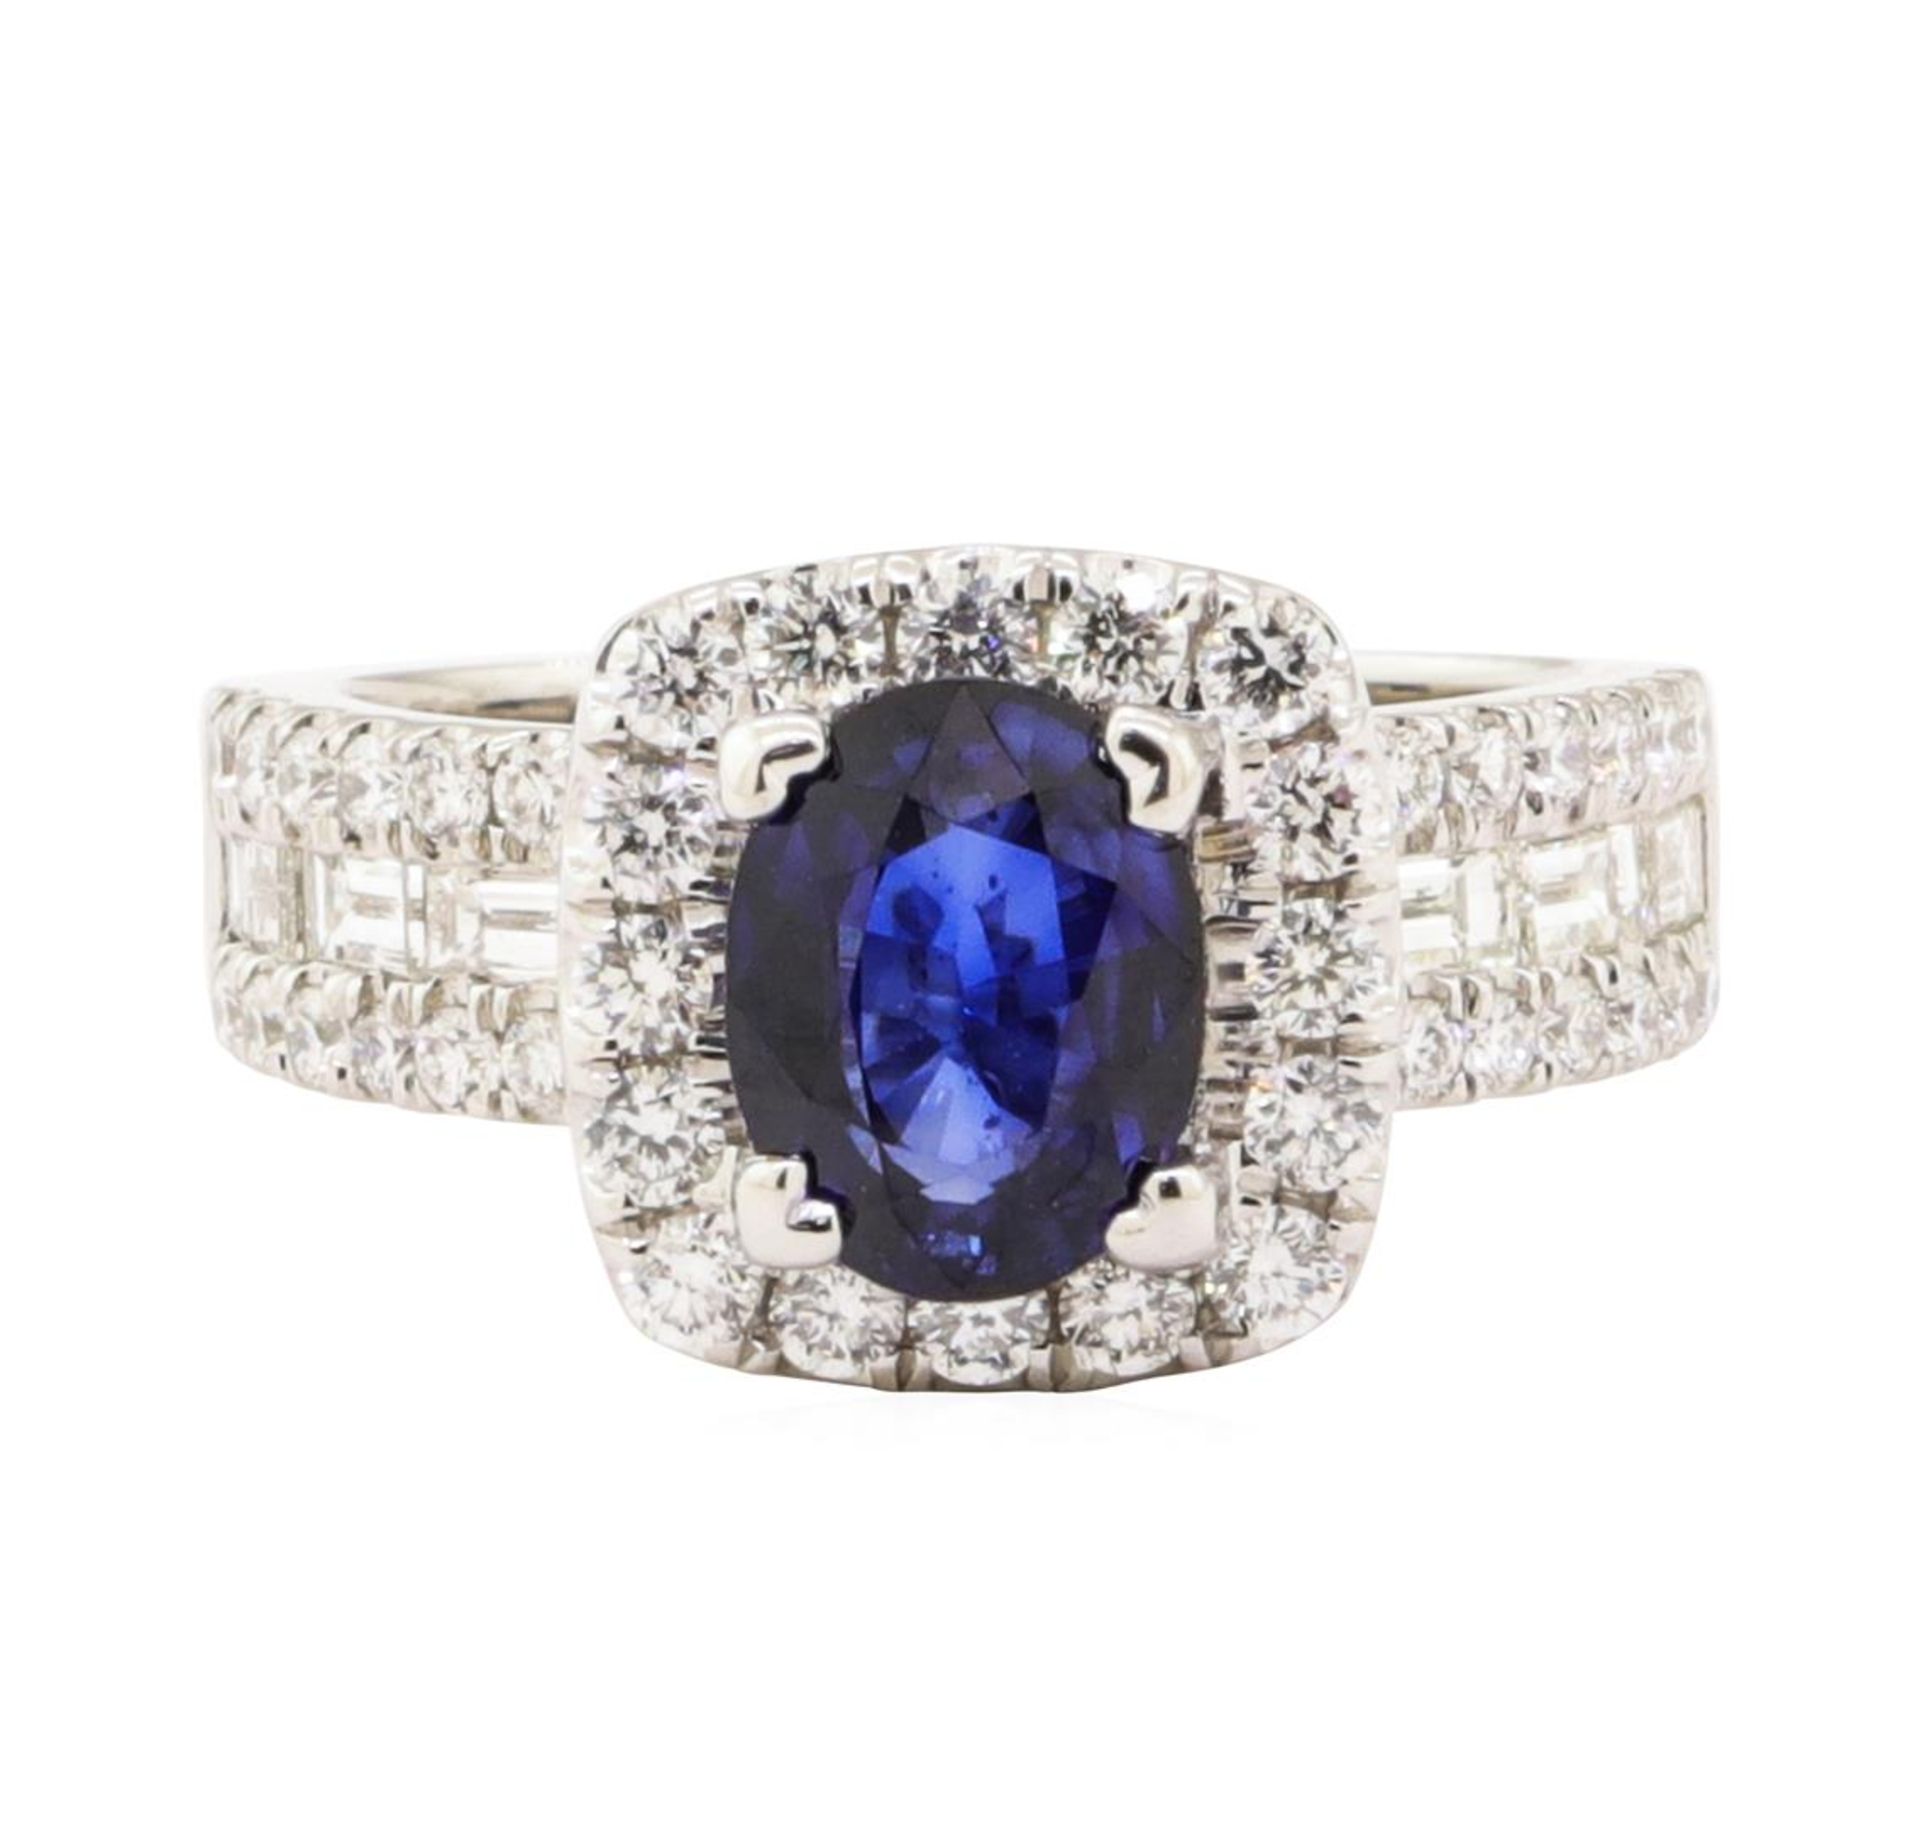 2.79 ctw Blue Sapphire And Diamond Ring - 14KT White Gold - Image 2 of 5